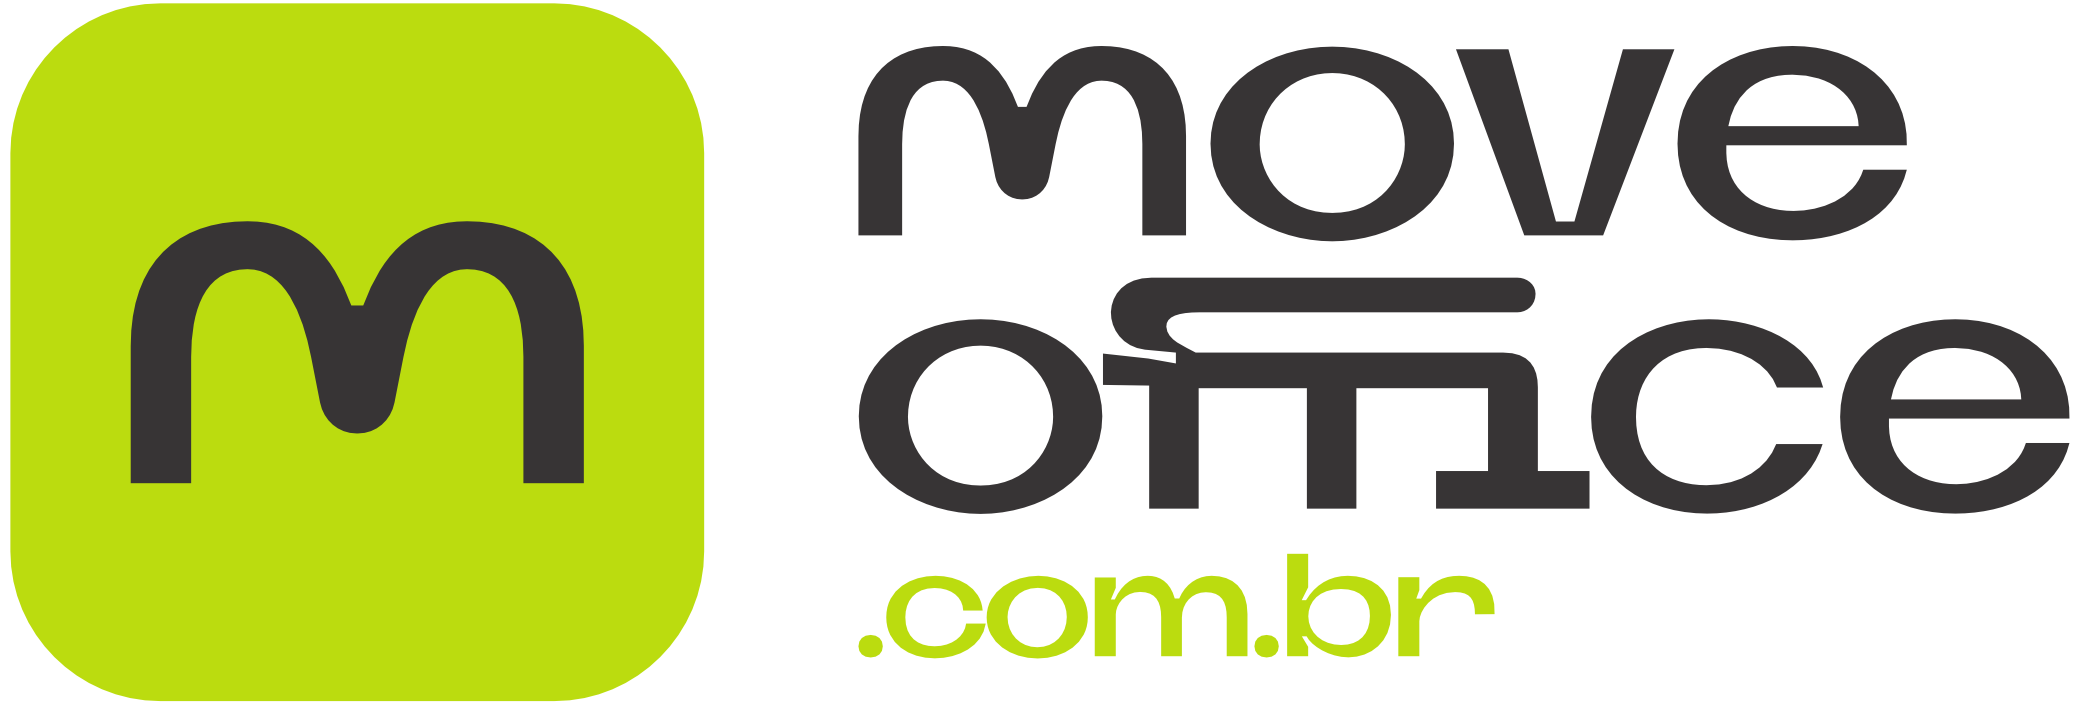 Move-Office-Logo-2-1.png